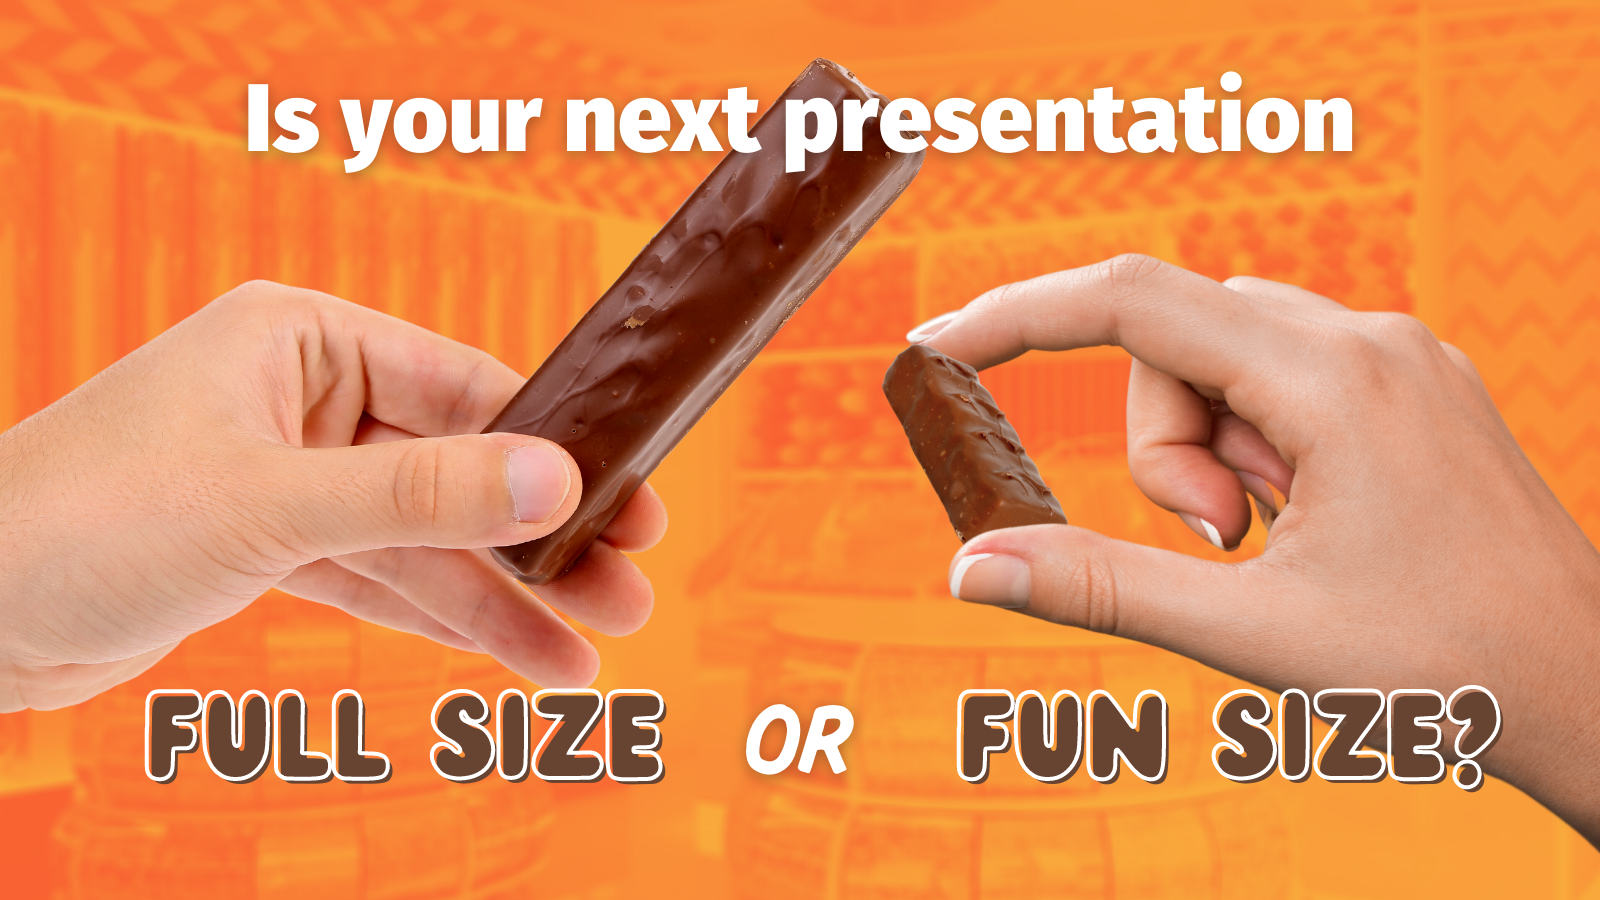 Is your next presentation full size or fun size?